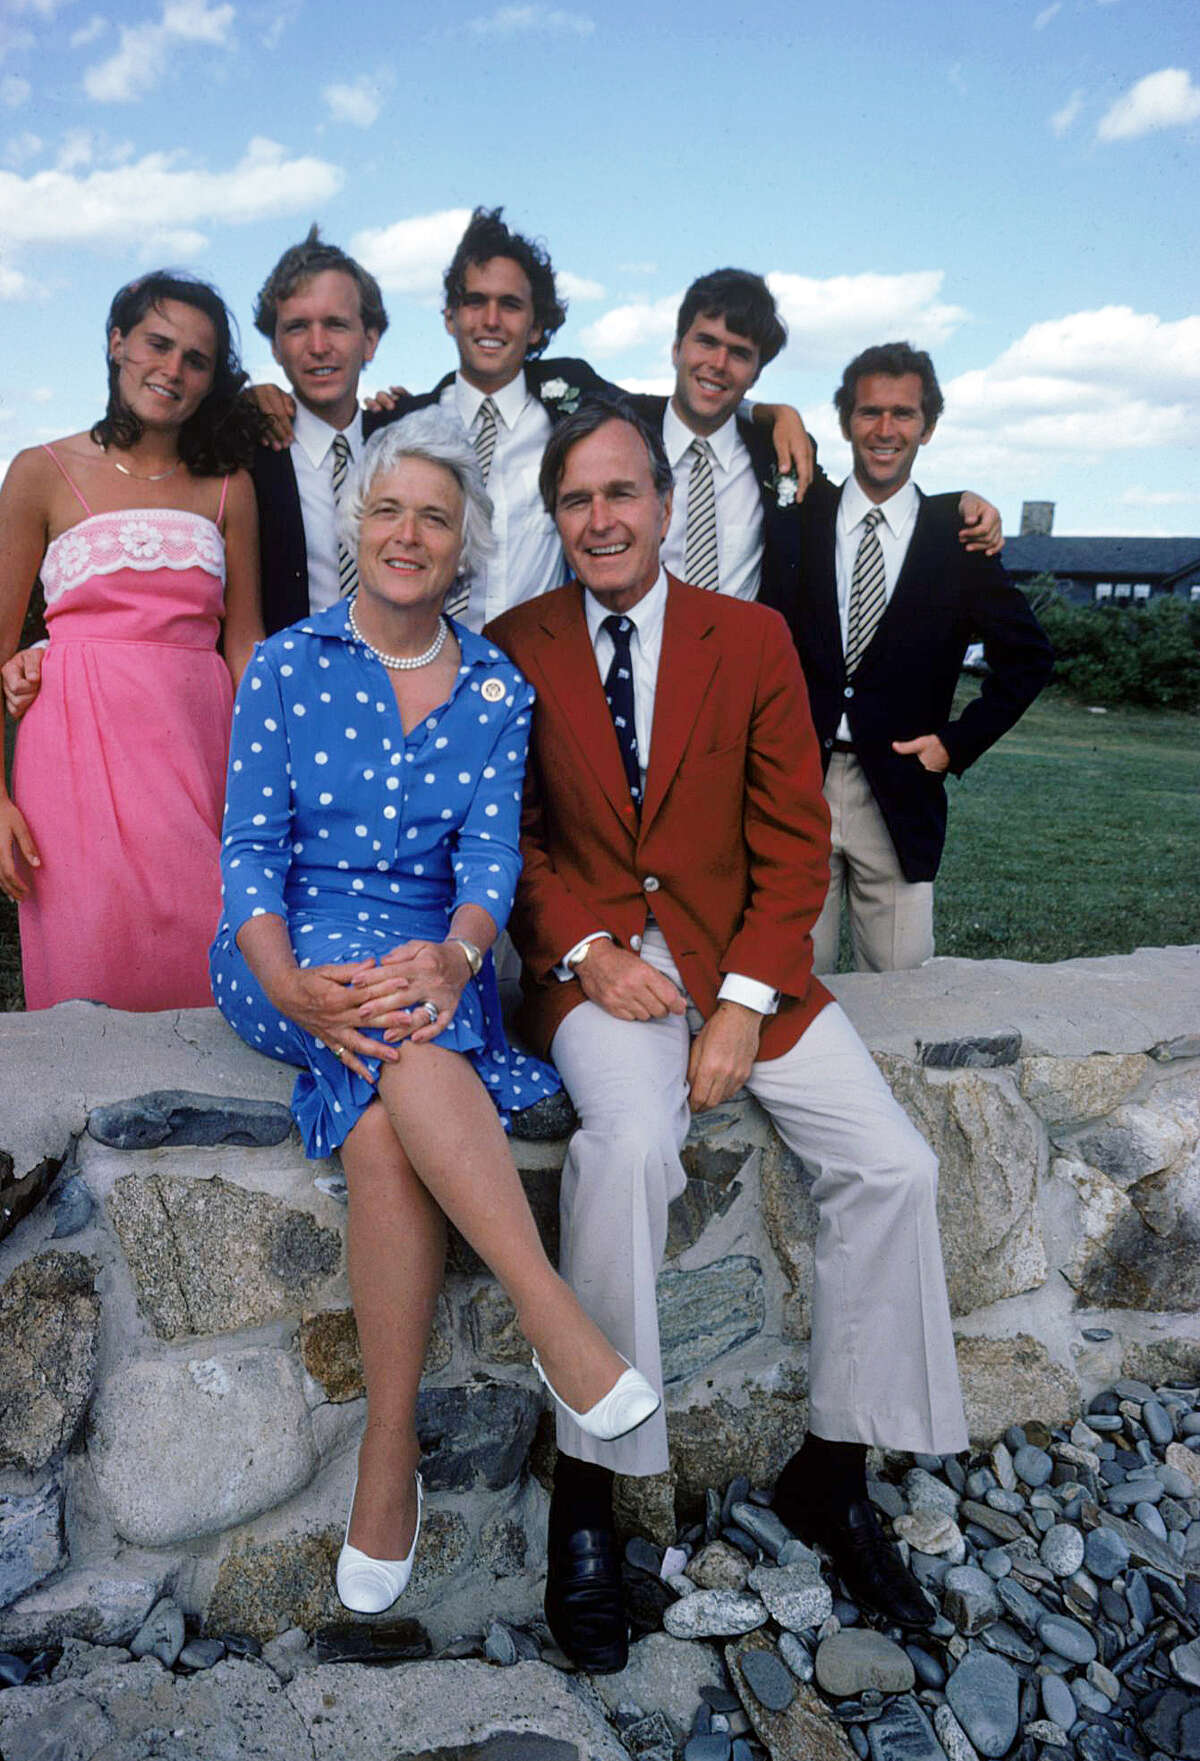 Barbara and George H.W. Bush: A love story Barbara and George Bush are pictured with their children (L-R) Dorothy, Neil, Marvin, Jeb and George. >>Click through the gallery to view intimate family photos and to learn more about Barbara and George H.W. Bush's lives together.